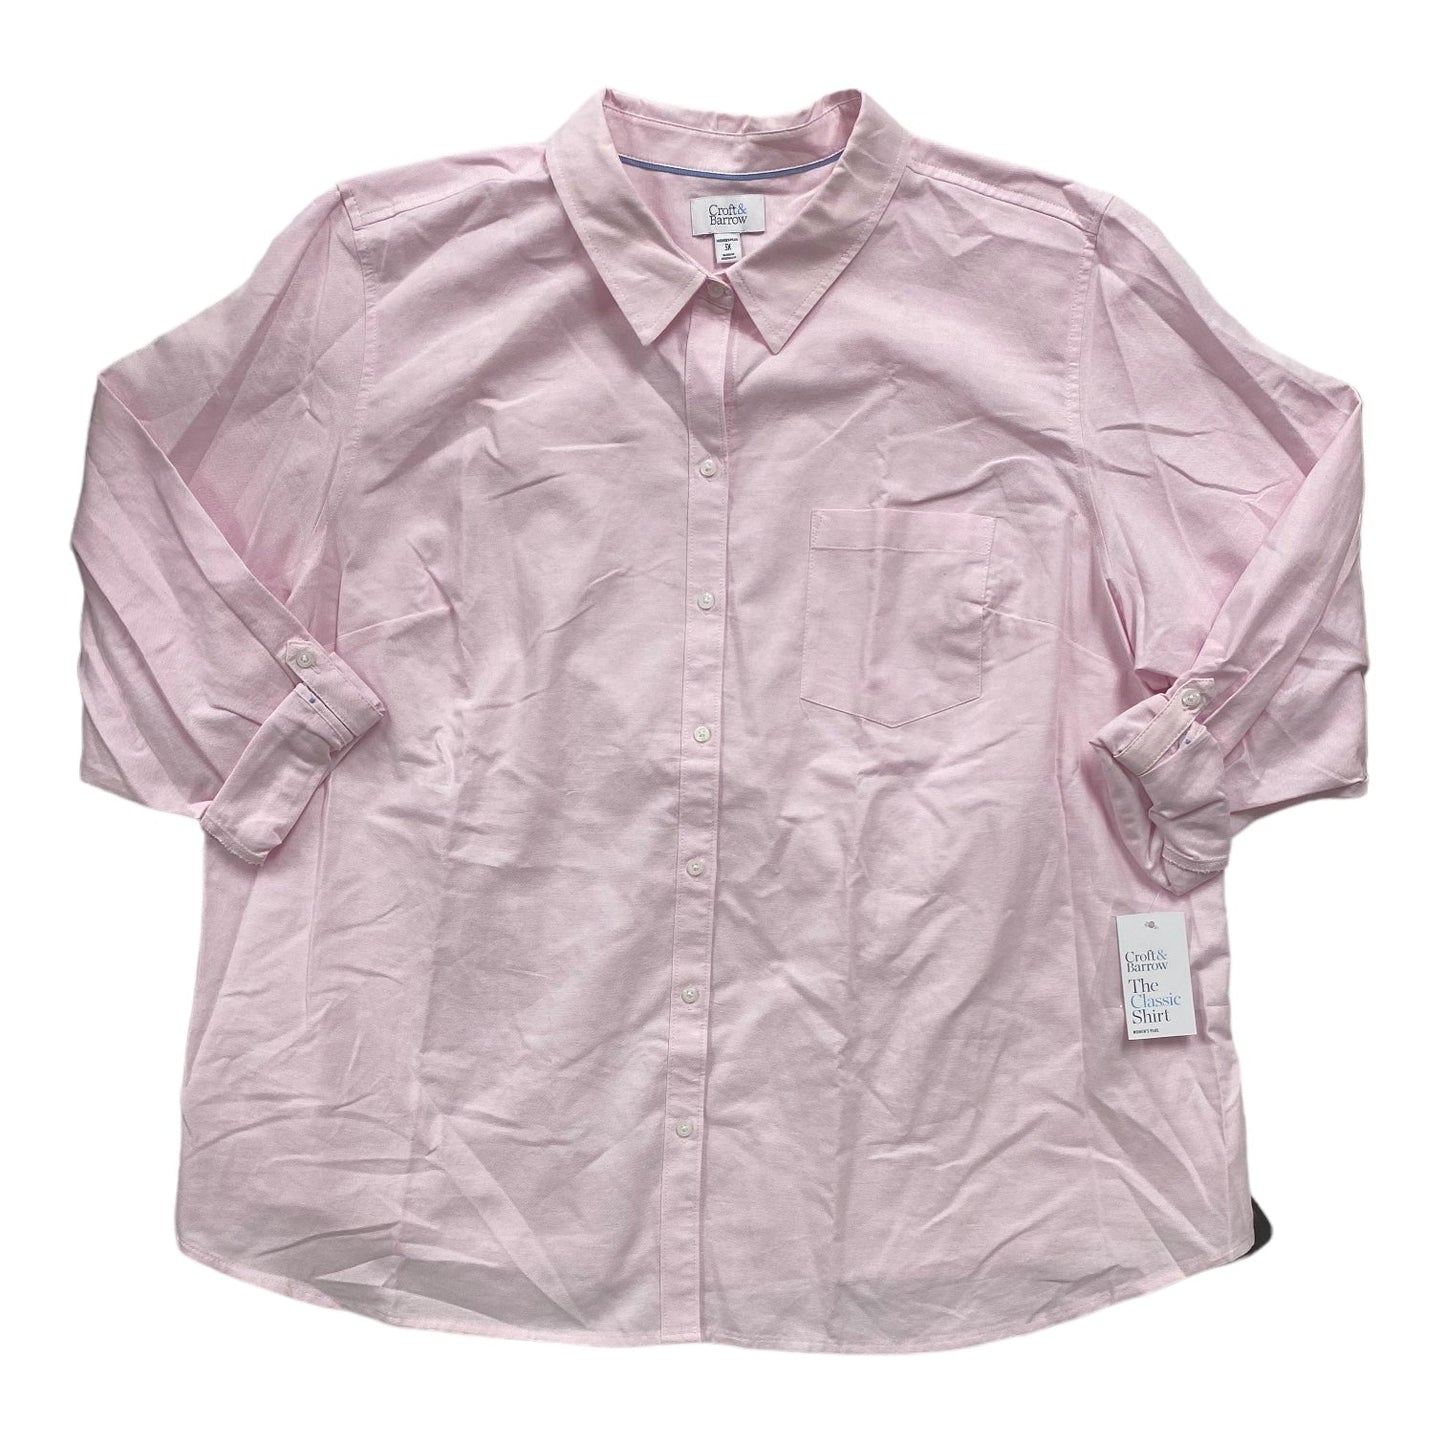 Pink Top Long Sleeve Croft And Barrow, Size 3x